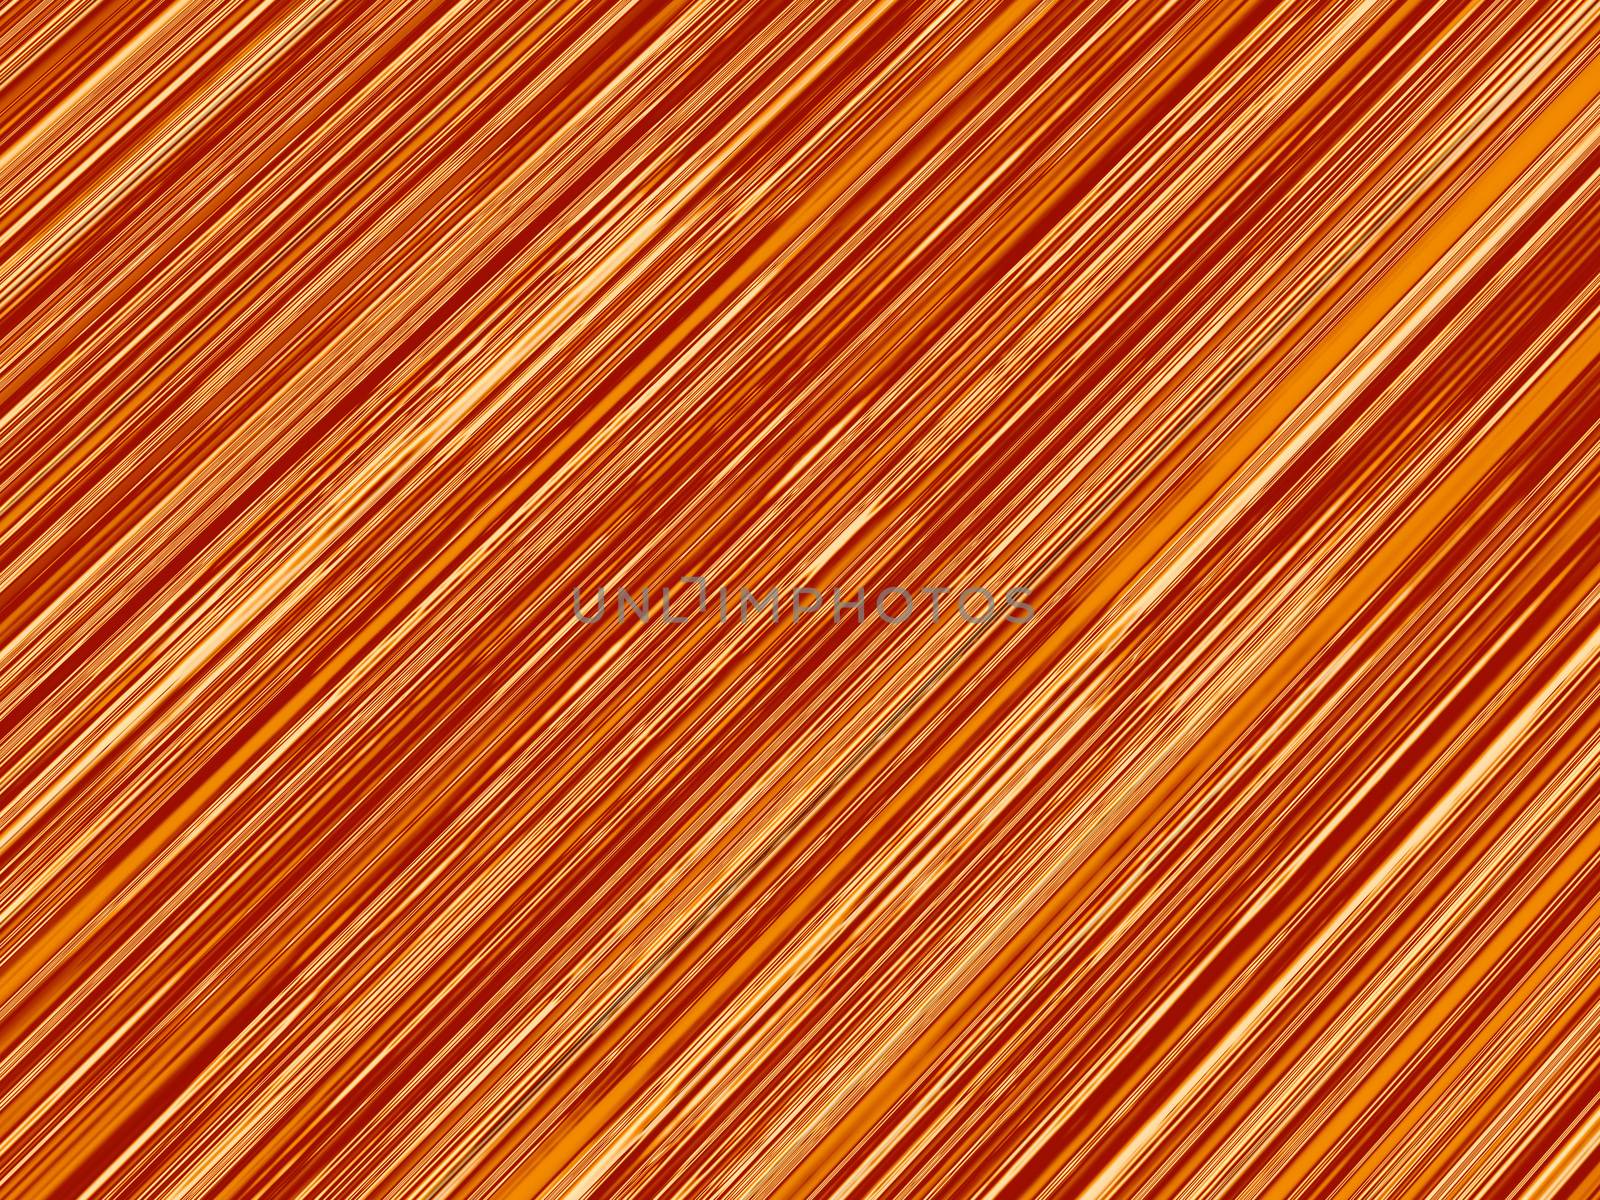 Diagonal Striped Background in Red and Orange Tones - Detailed Illustration, Image